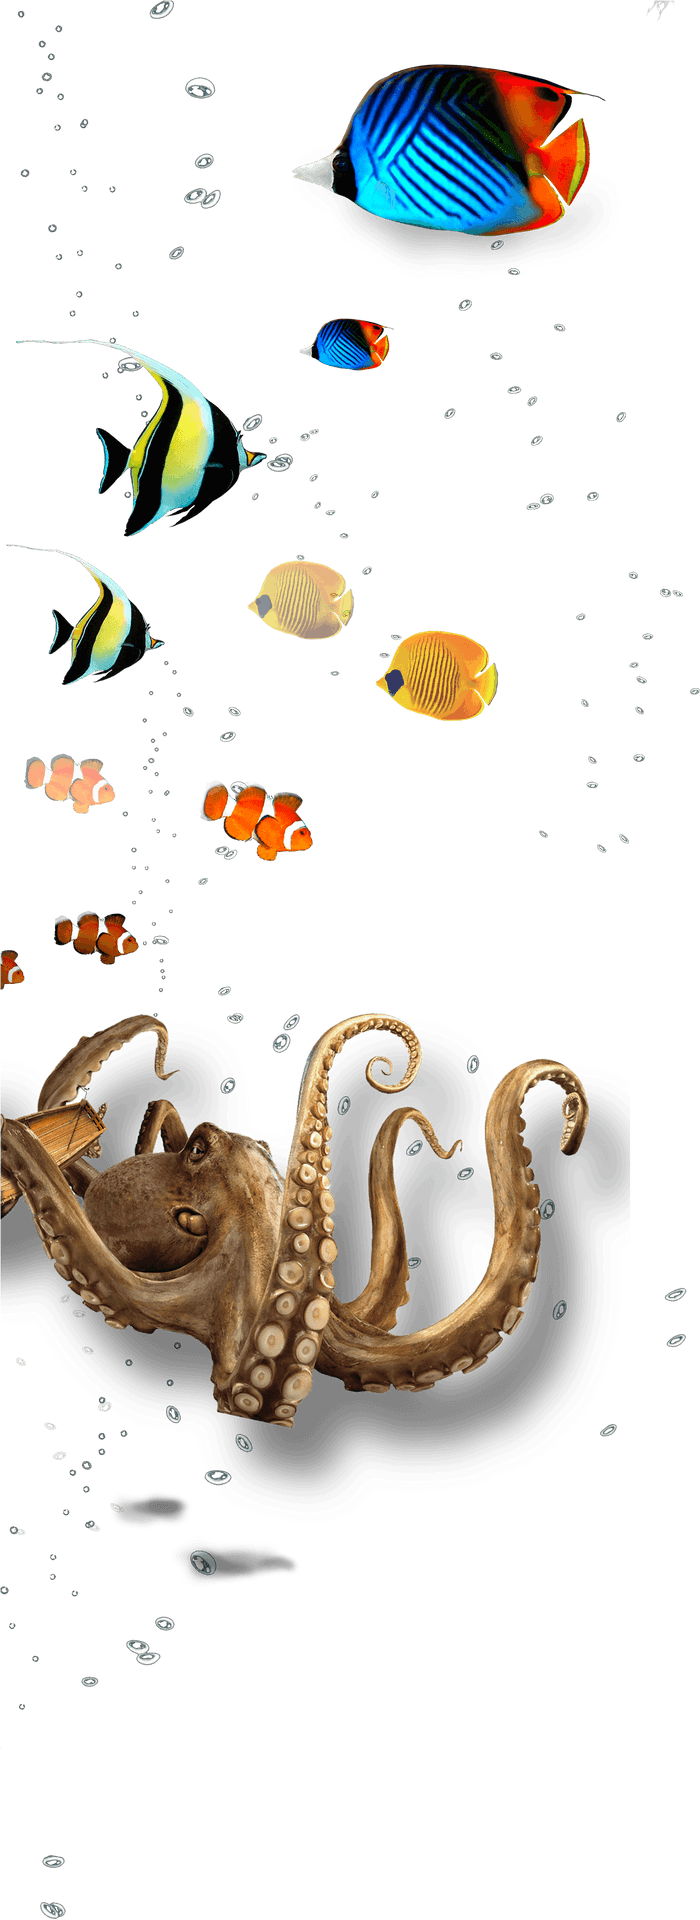 Underwater Marine Life Collage PNG image